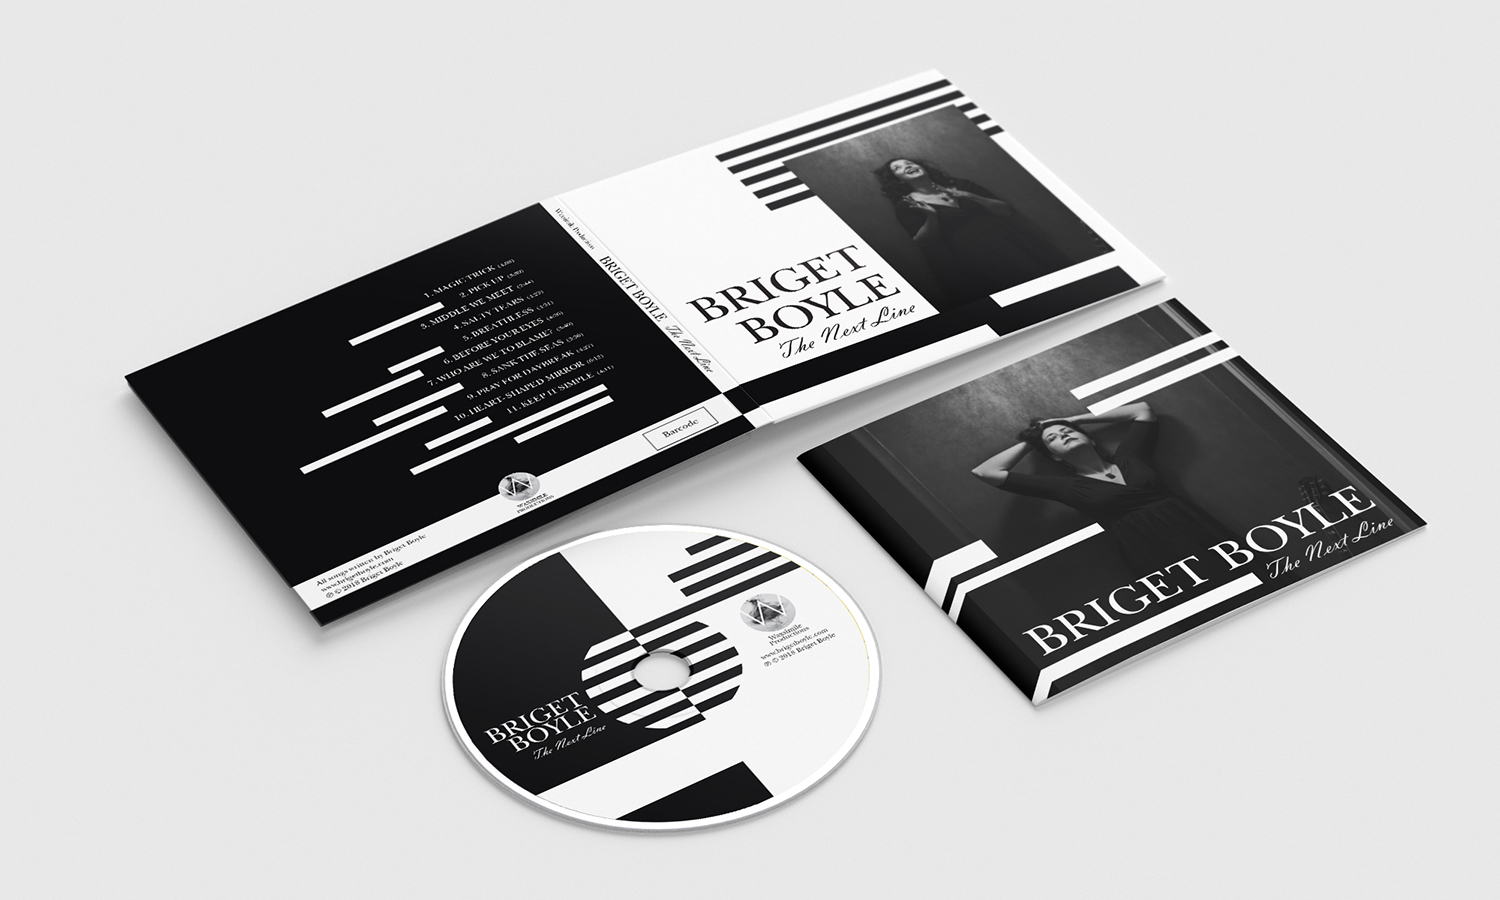 top down view of the front and back cover, interior booklet and cd design of an album